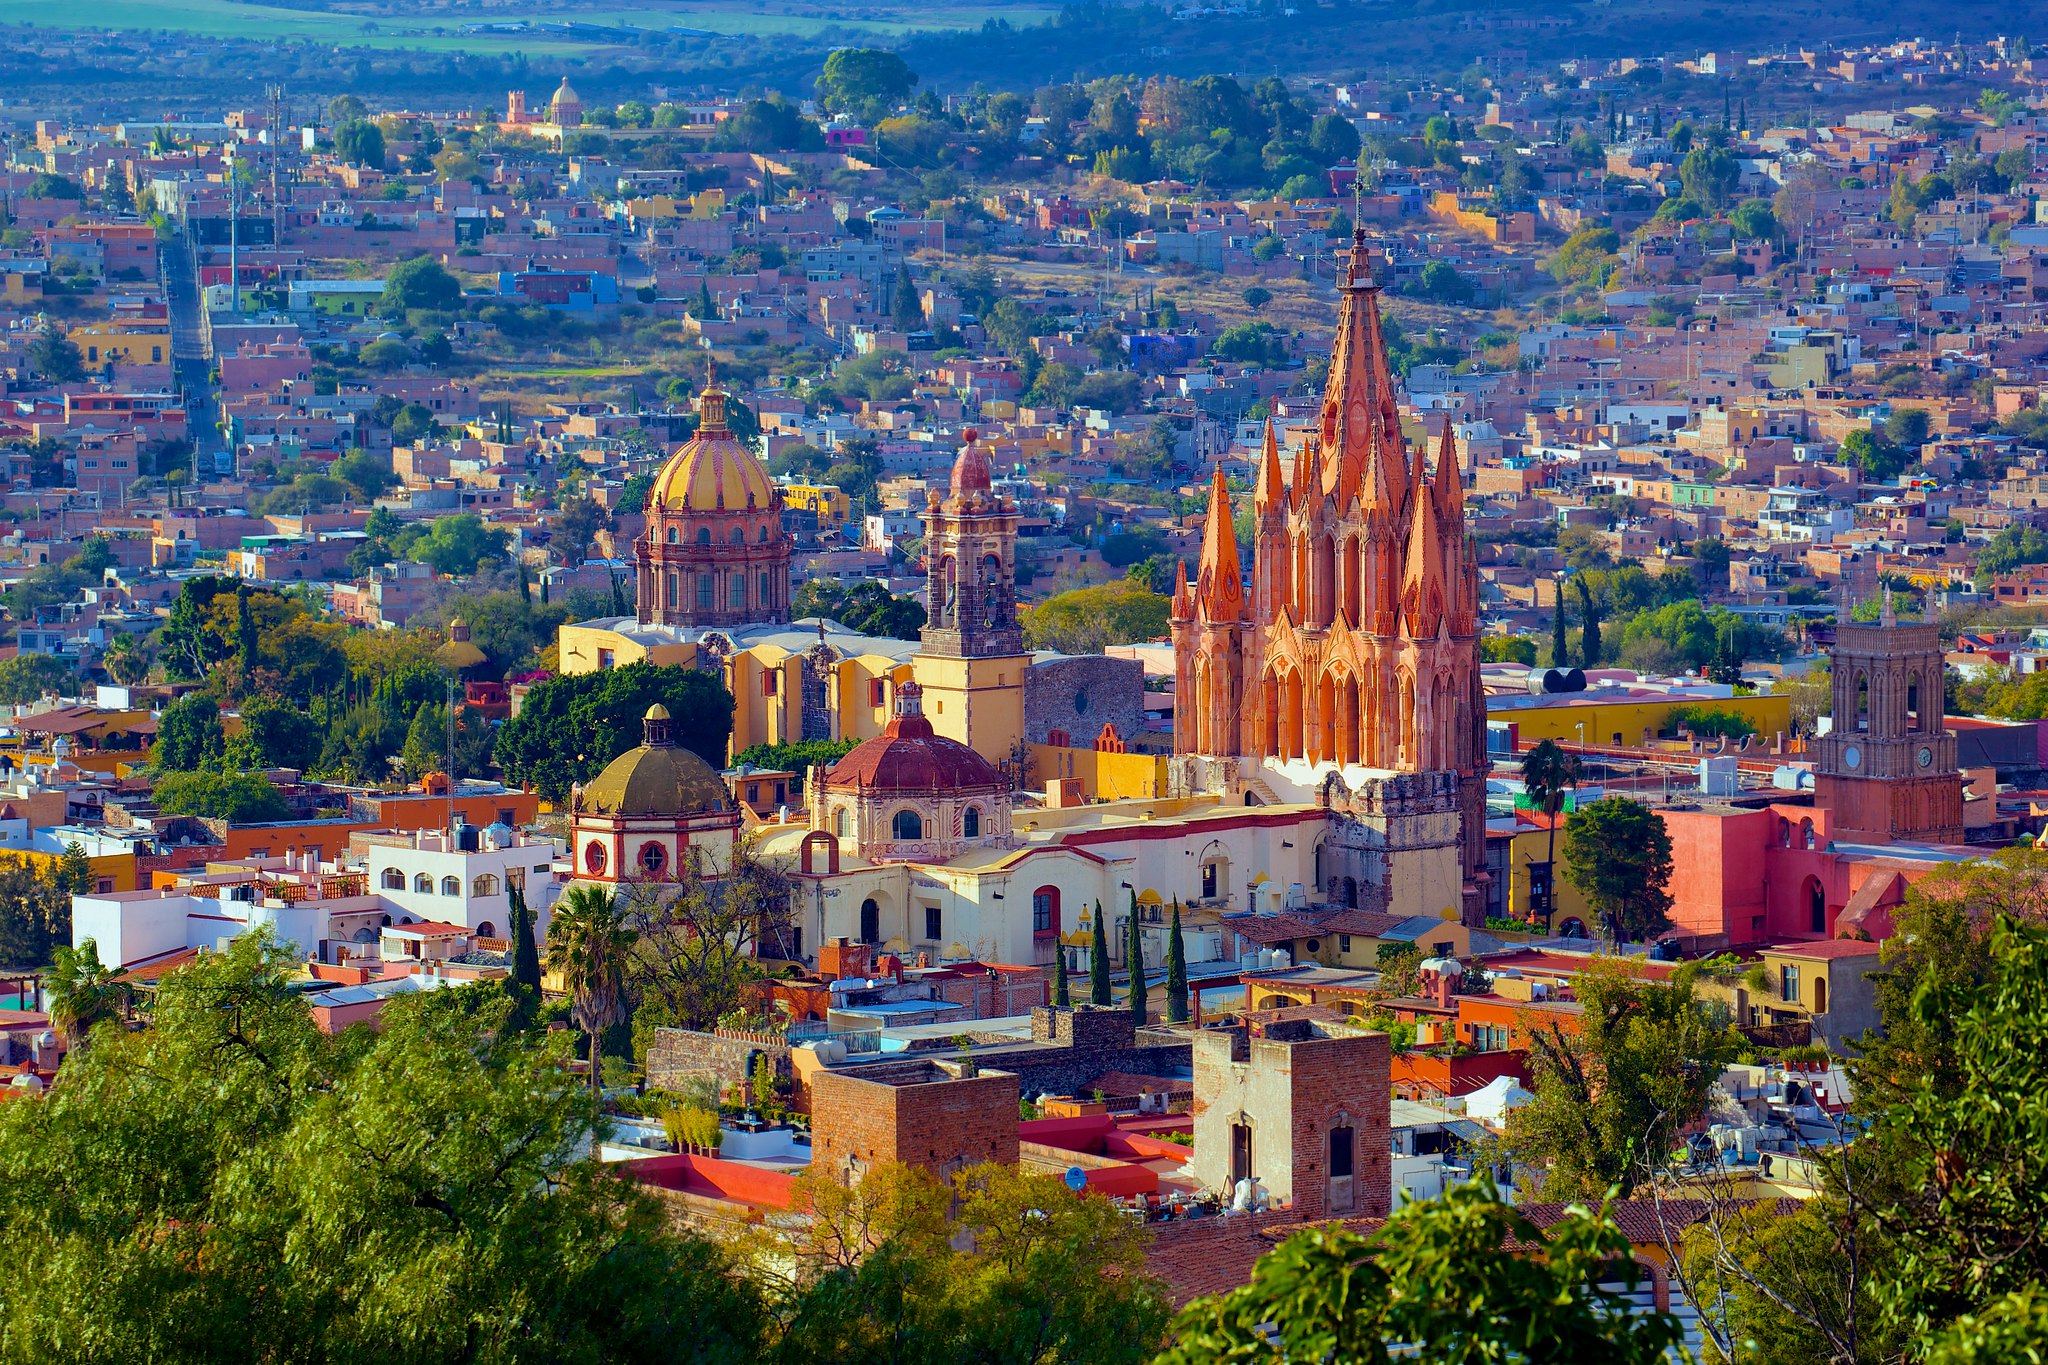 What You Need To Know About Selling A Home In San Miguel De Allende, Mexico